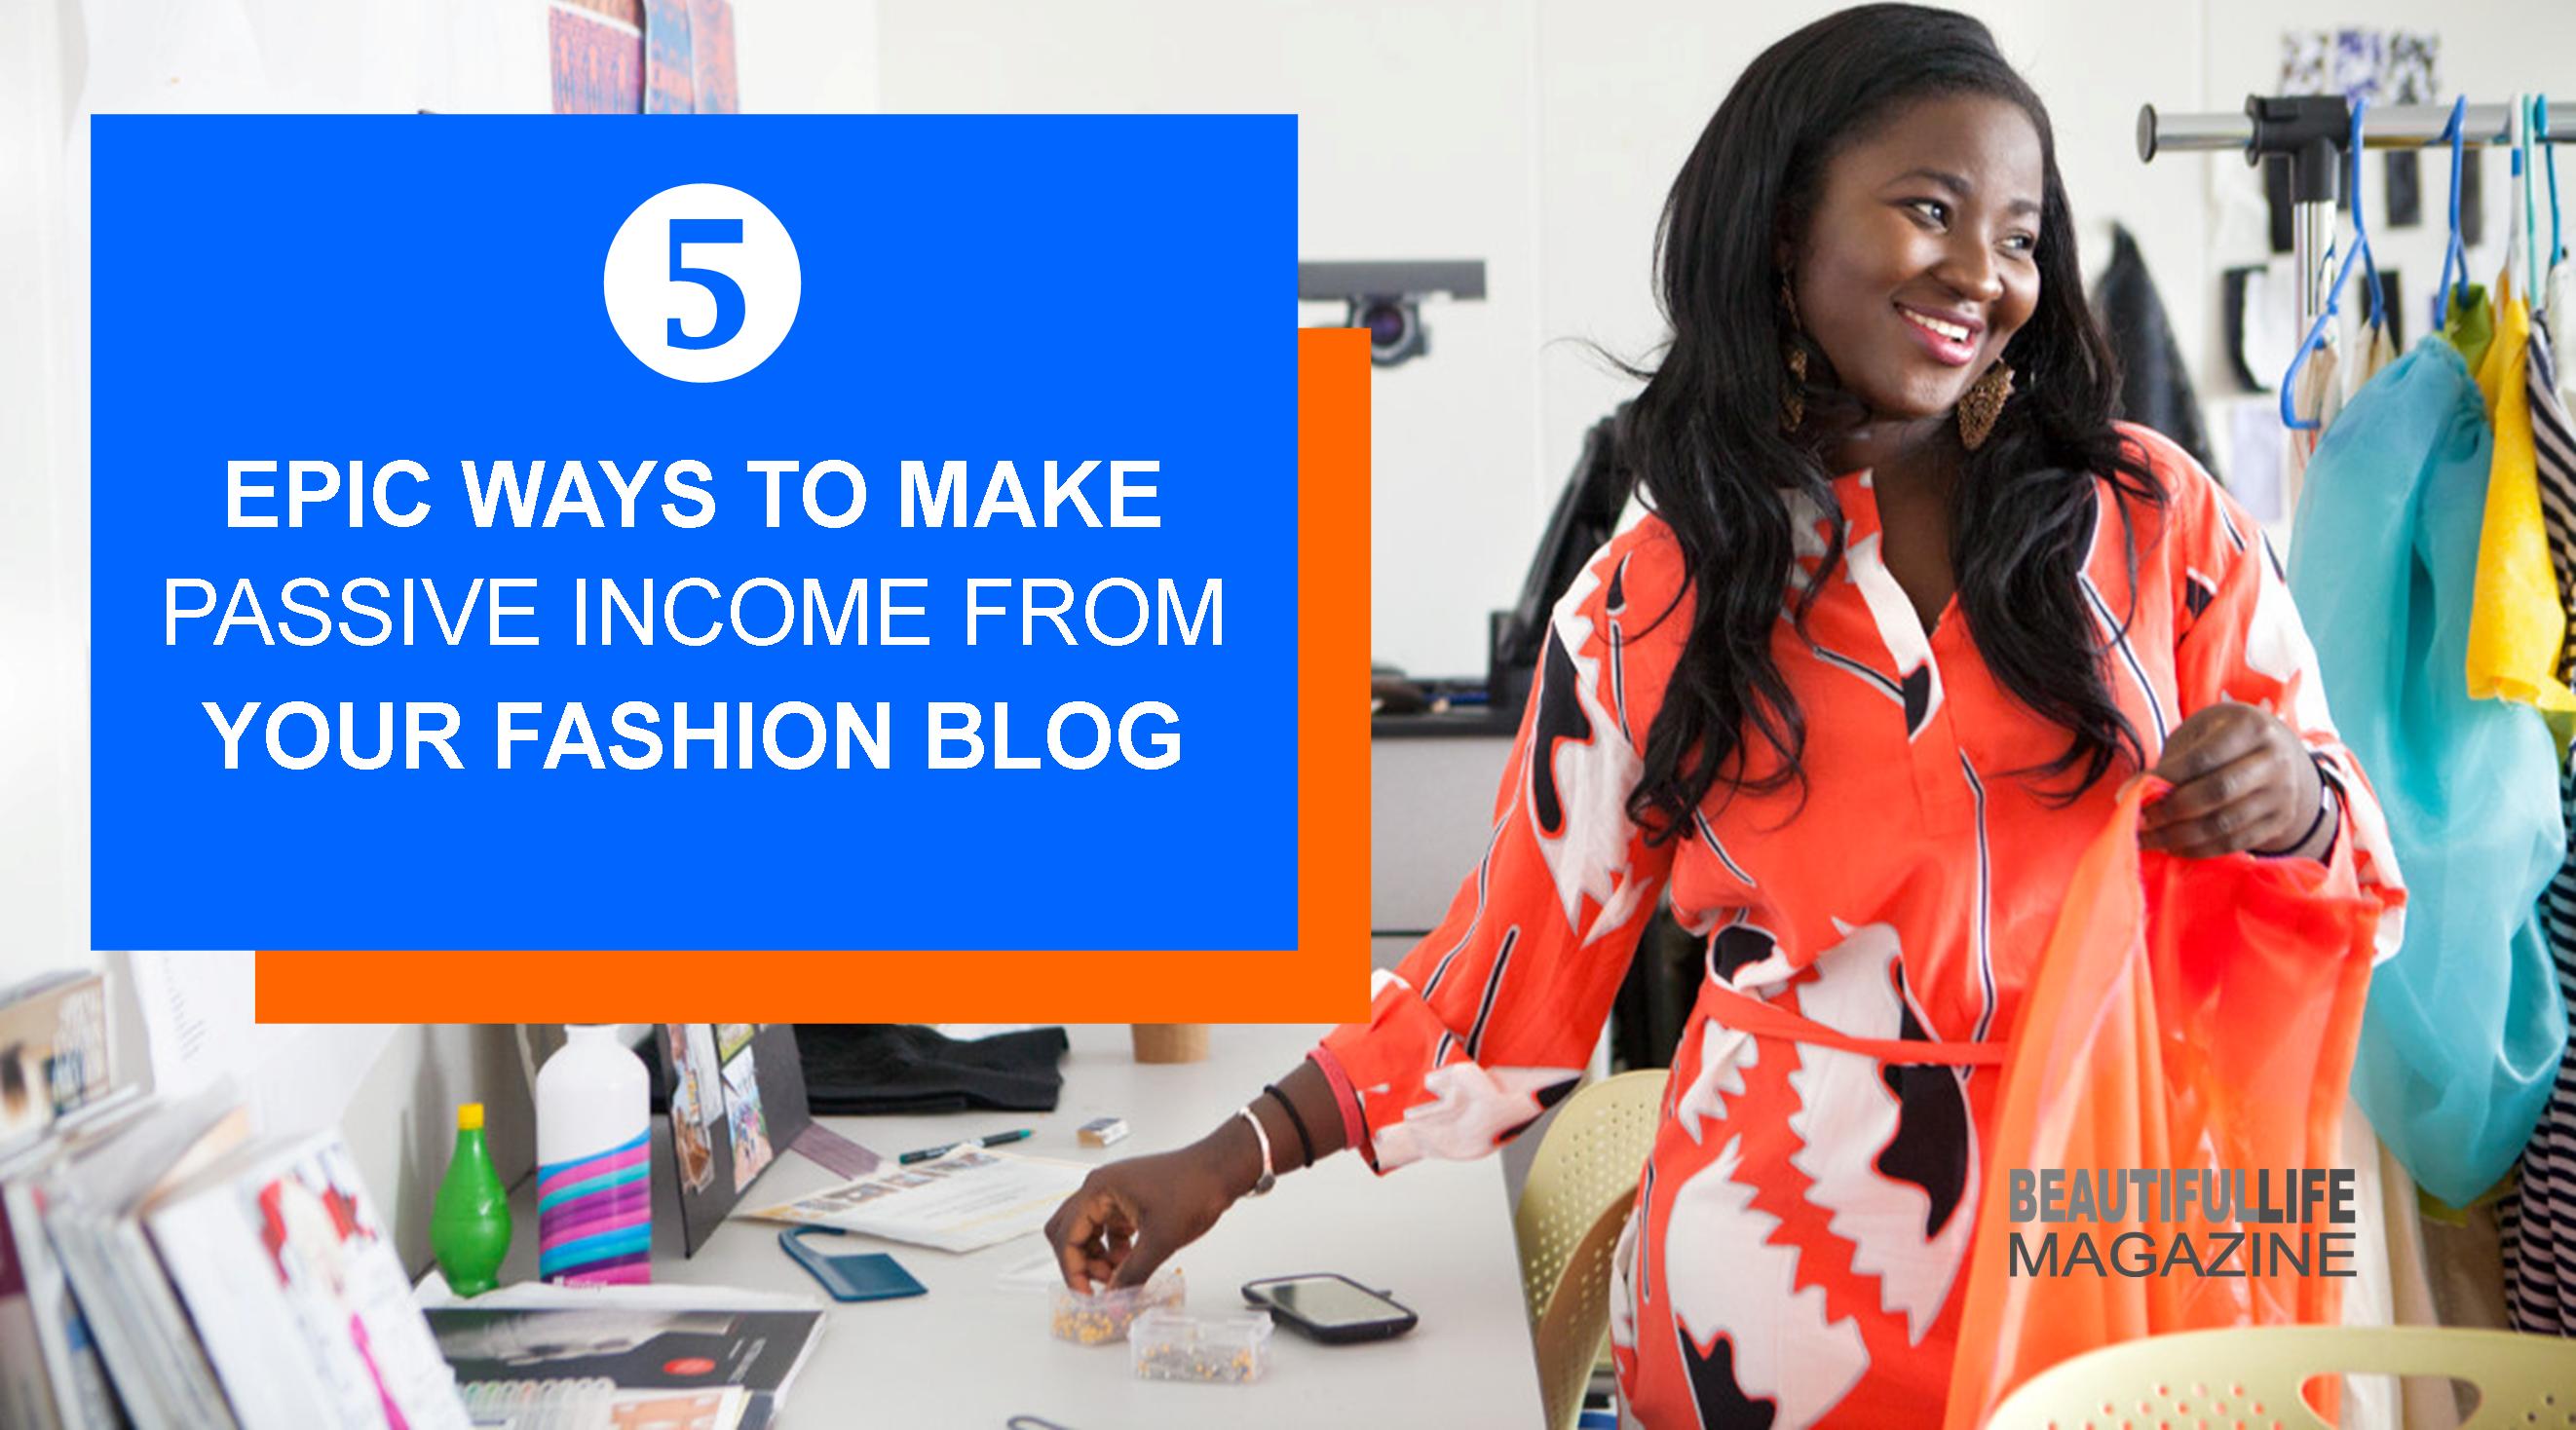 Making money shouldn’t be your sole reason for blogging but it’s a great bonus for doing something you love! Once you’ve established your fashion blog, utilize some of these ideas and you’ll soon begin earning a little extra cash from your online space.